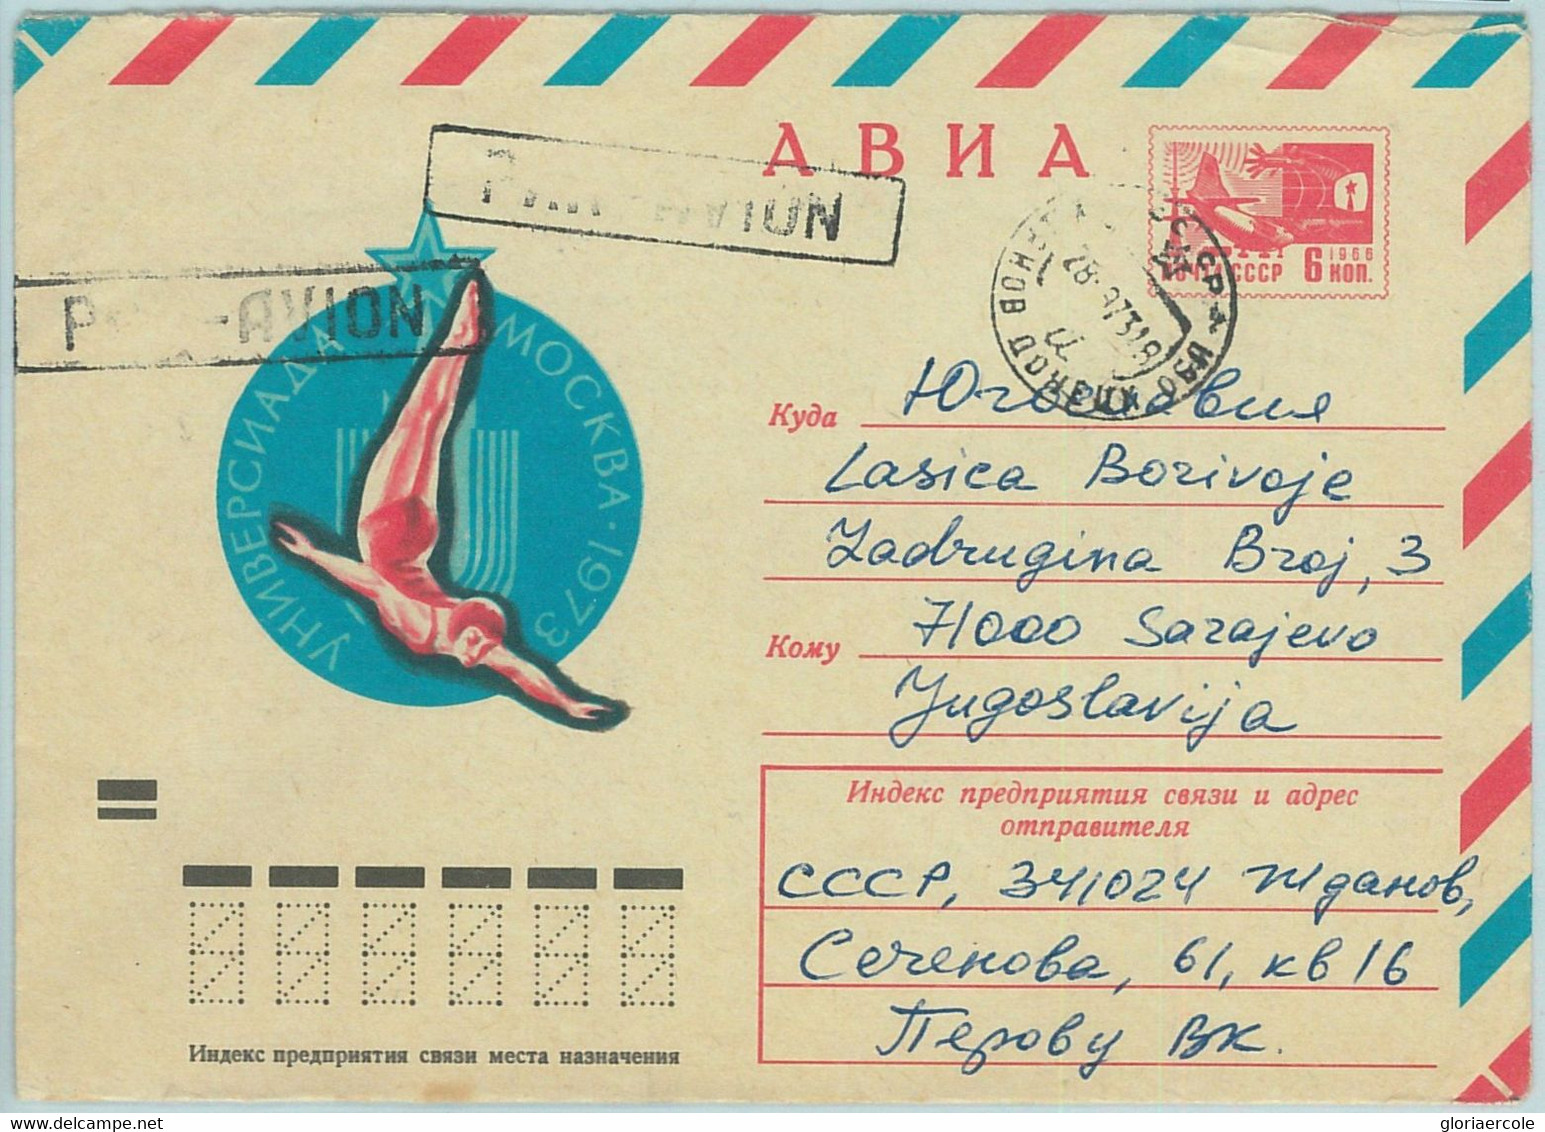 67800 - RUSSIA - POSTAL HISTORY - STATIONERY COVER - 1973, Universiade Games, Diving - Immersione